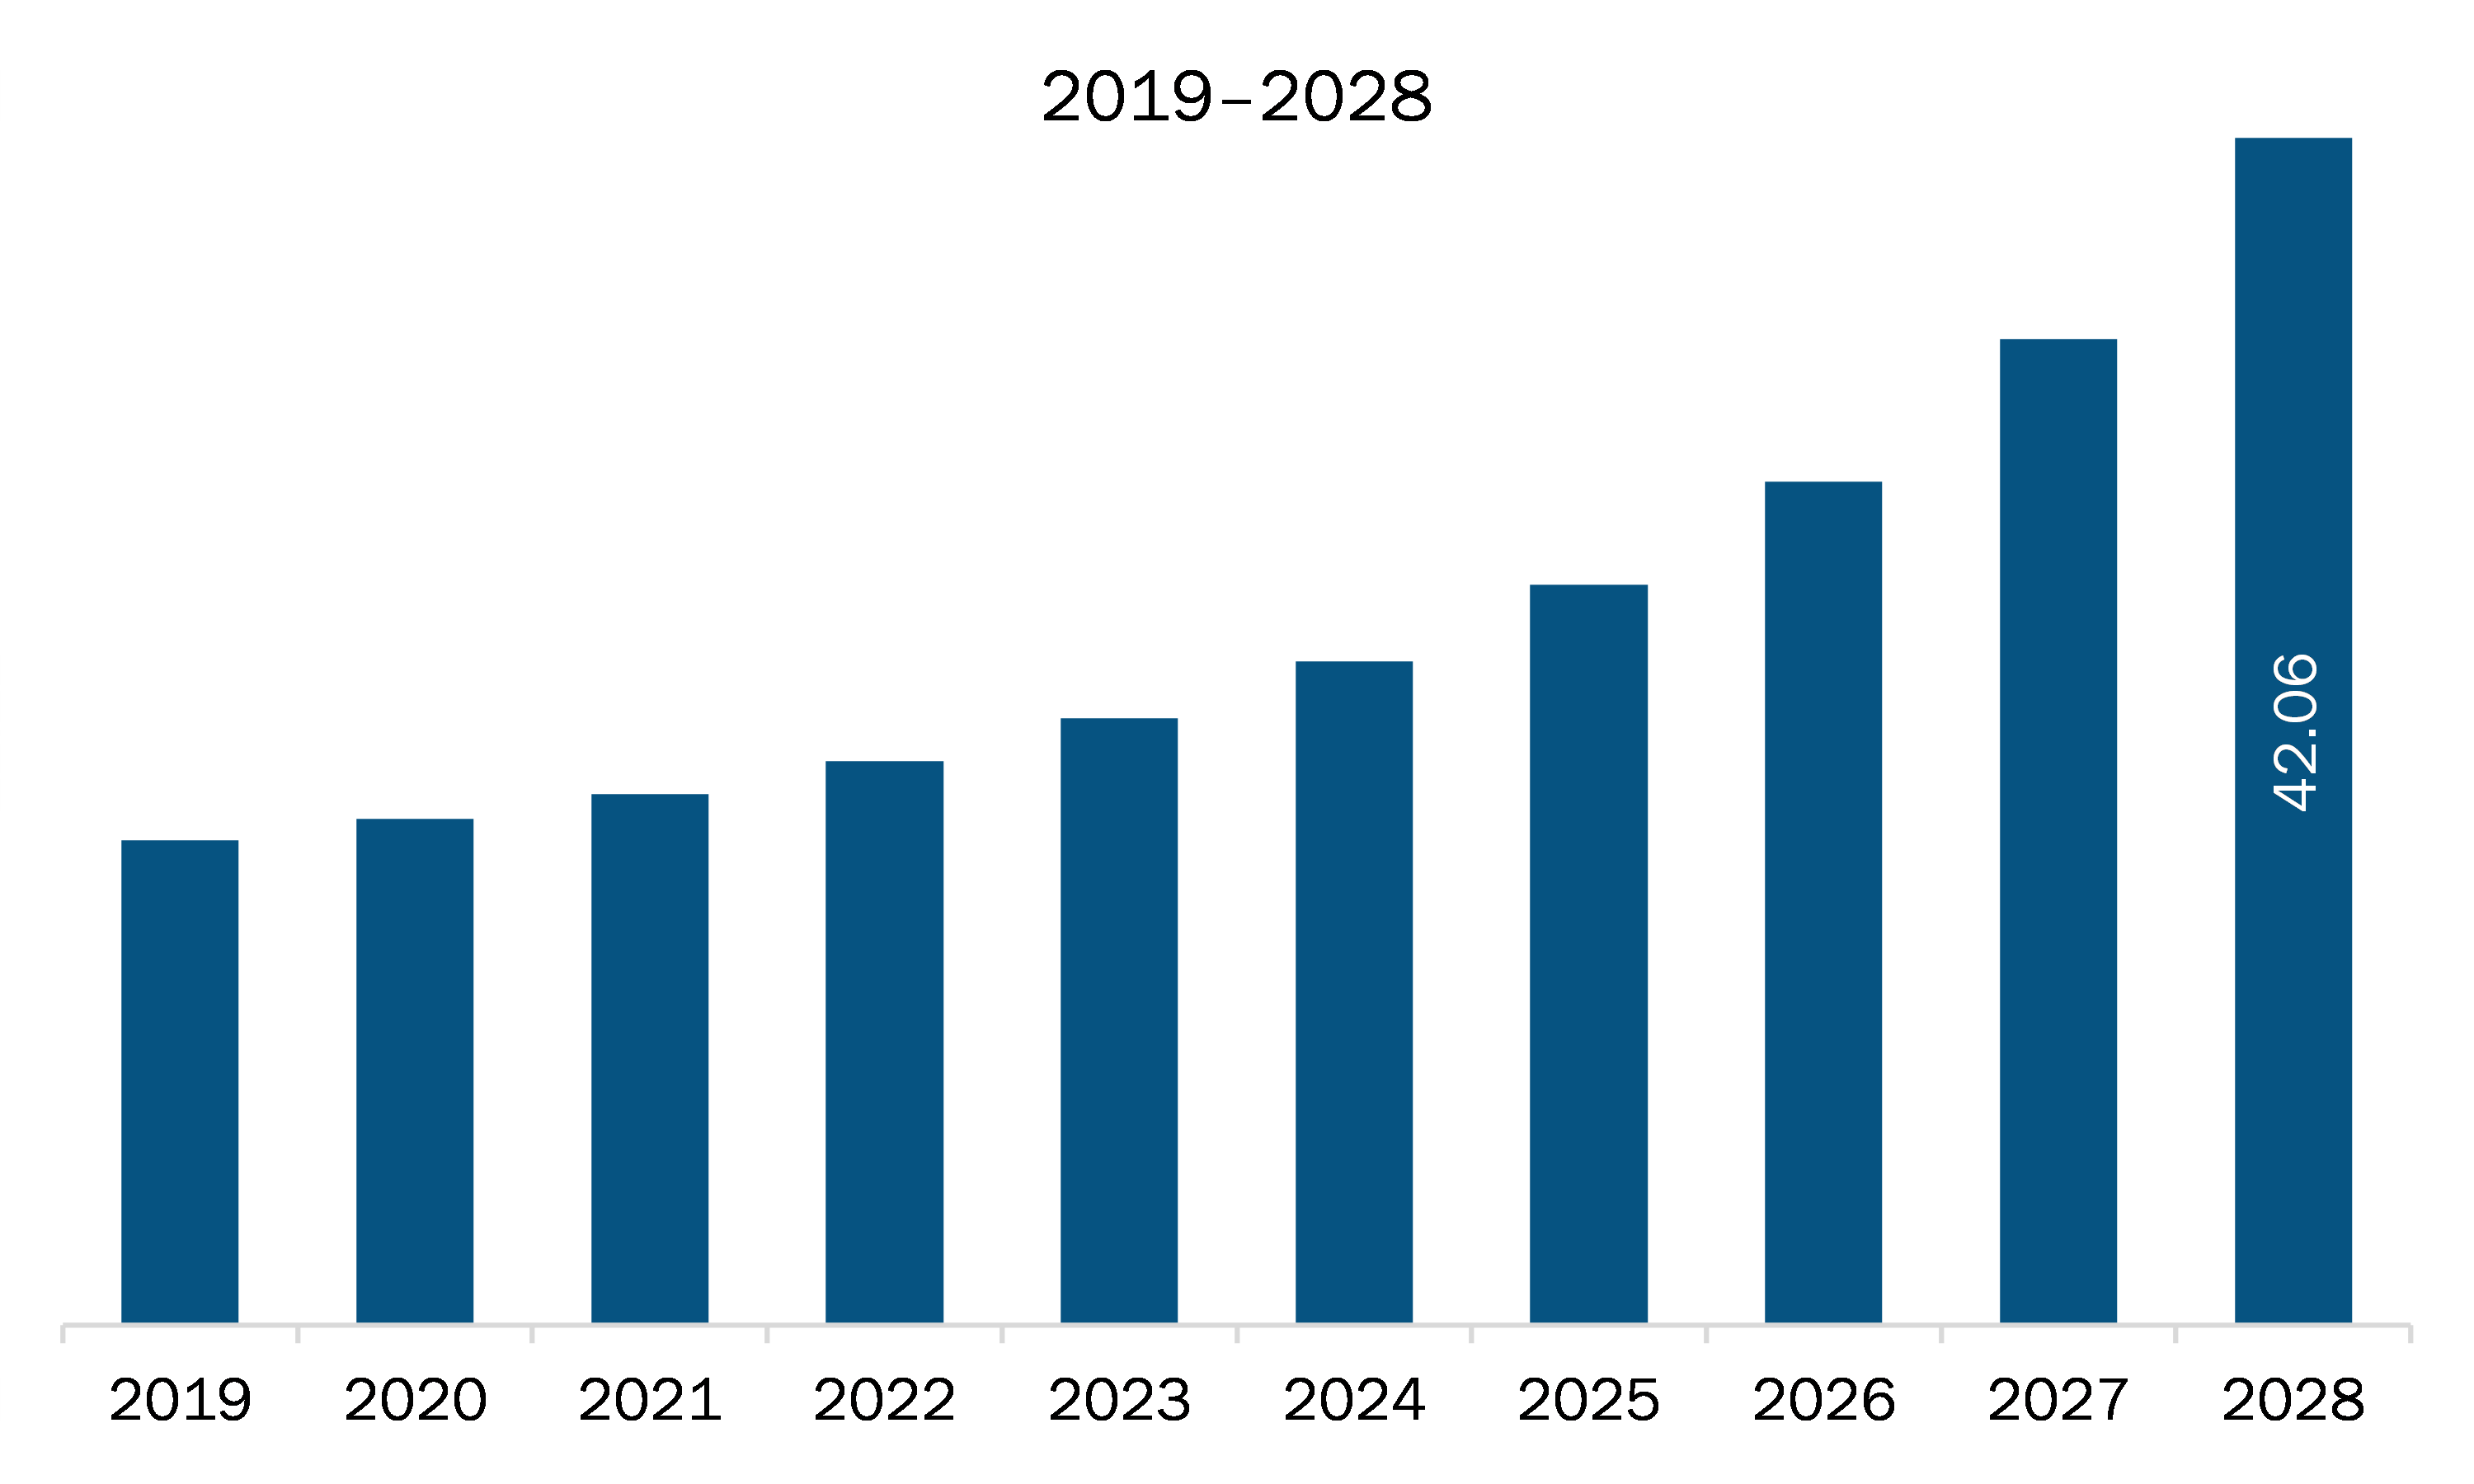 North America WealthTech Solution Market Market to Grow at a CAGR of 12.2% to reach US$ 42.06 billion from 2021 to 2028